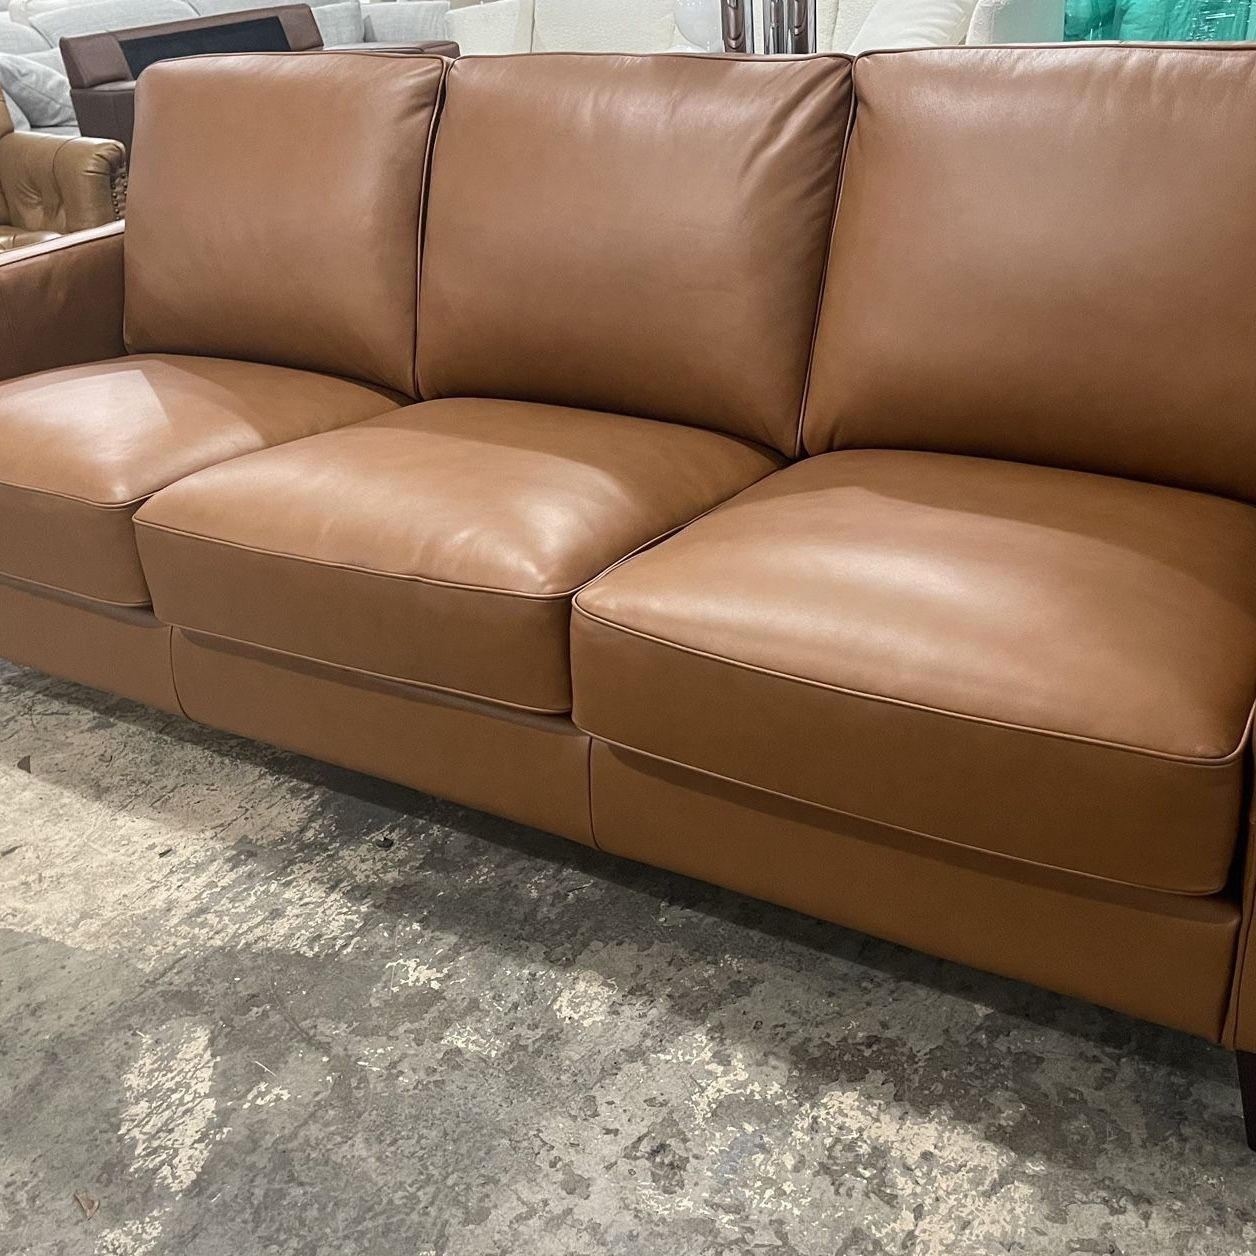 Stylish Sofa By West Park - New - Genuine Leather Brown Cognac- Delivery 🚚 